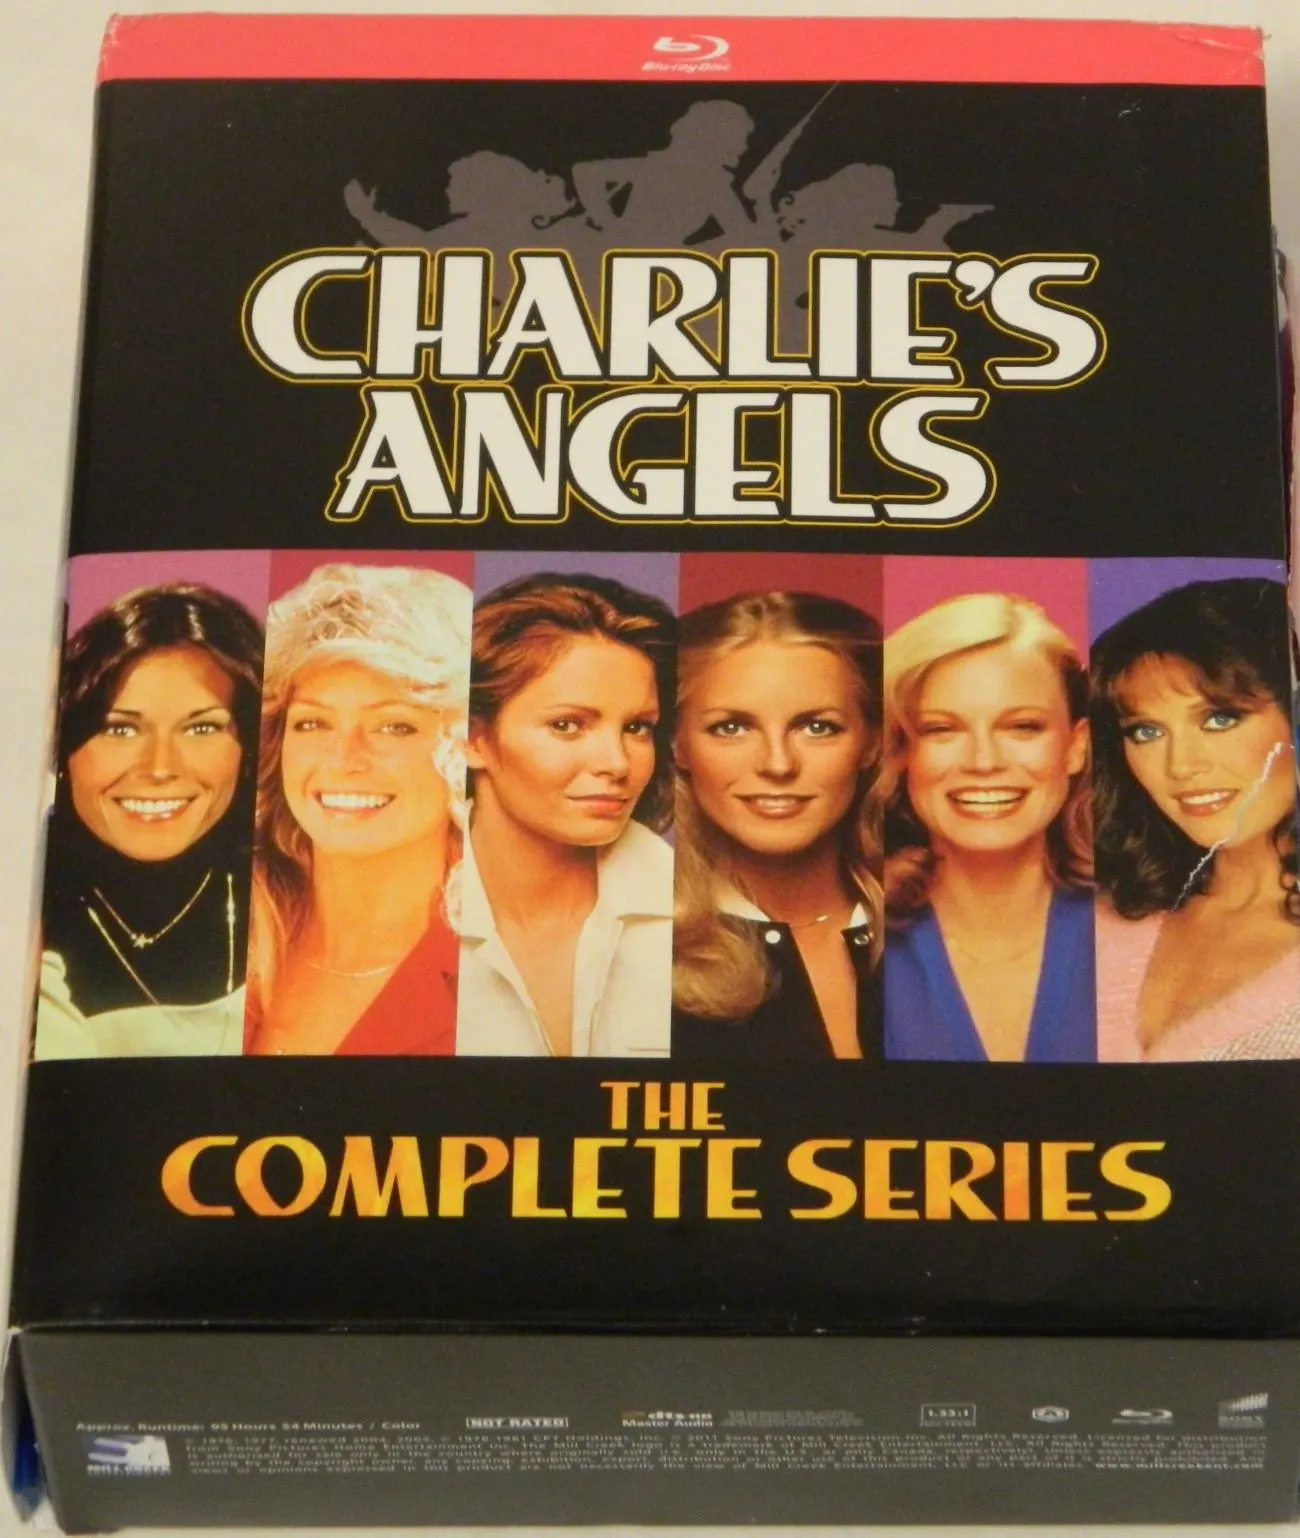 Charlie's Angels The Complete Series Blu-ray